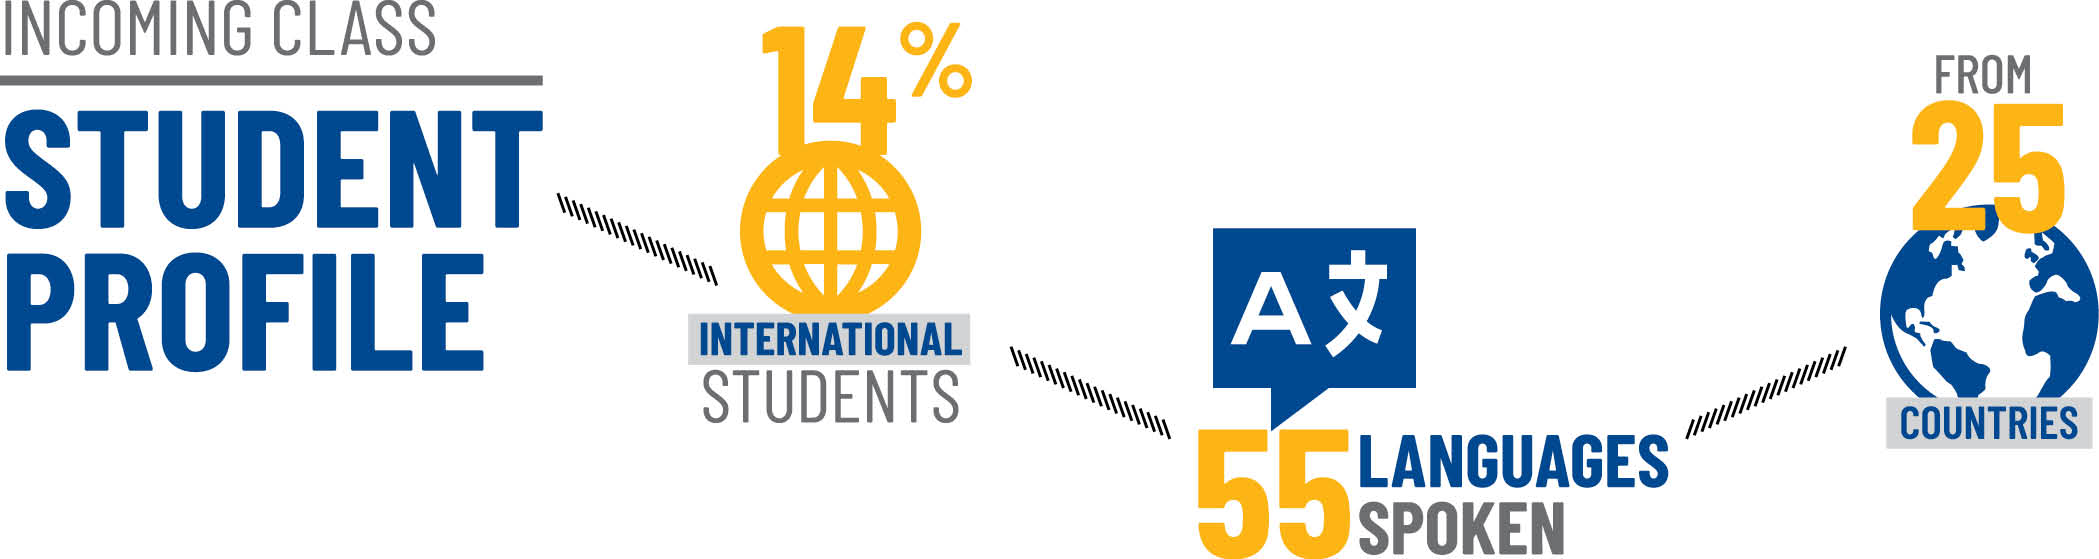 14% international students, 55 languages spoken, from 25 countries